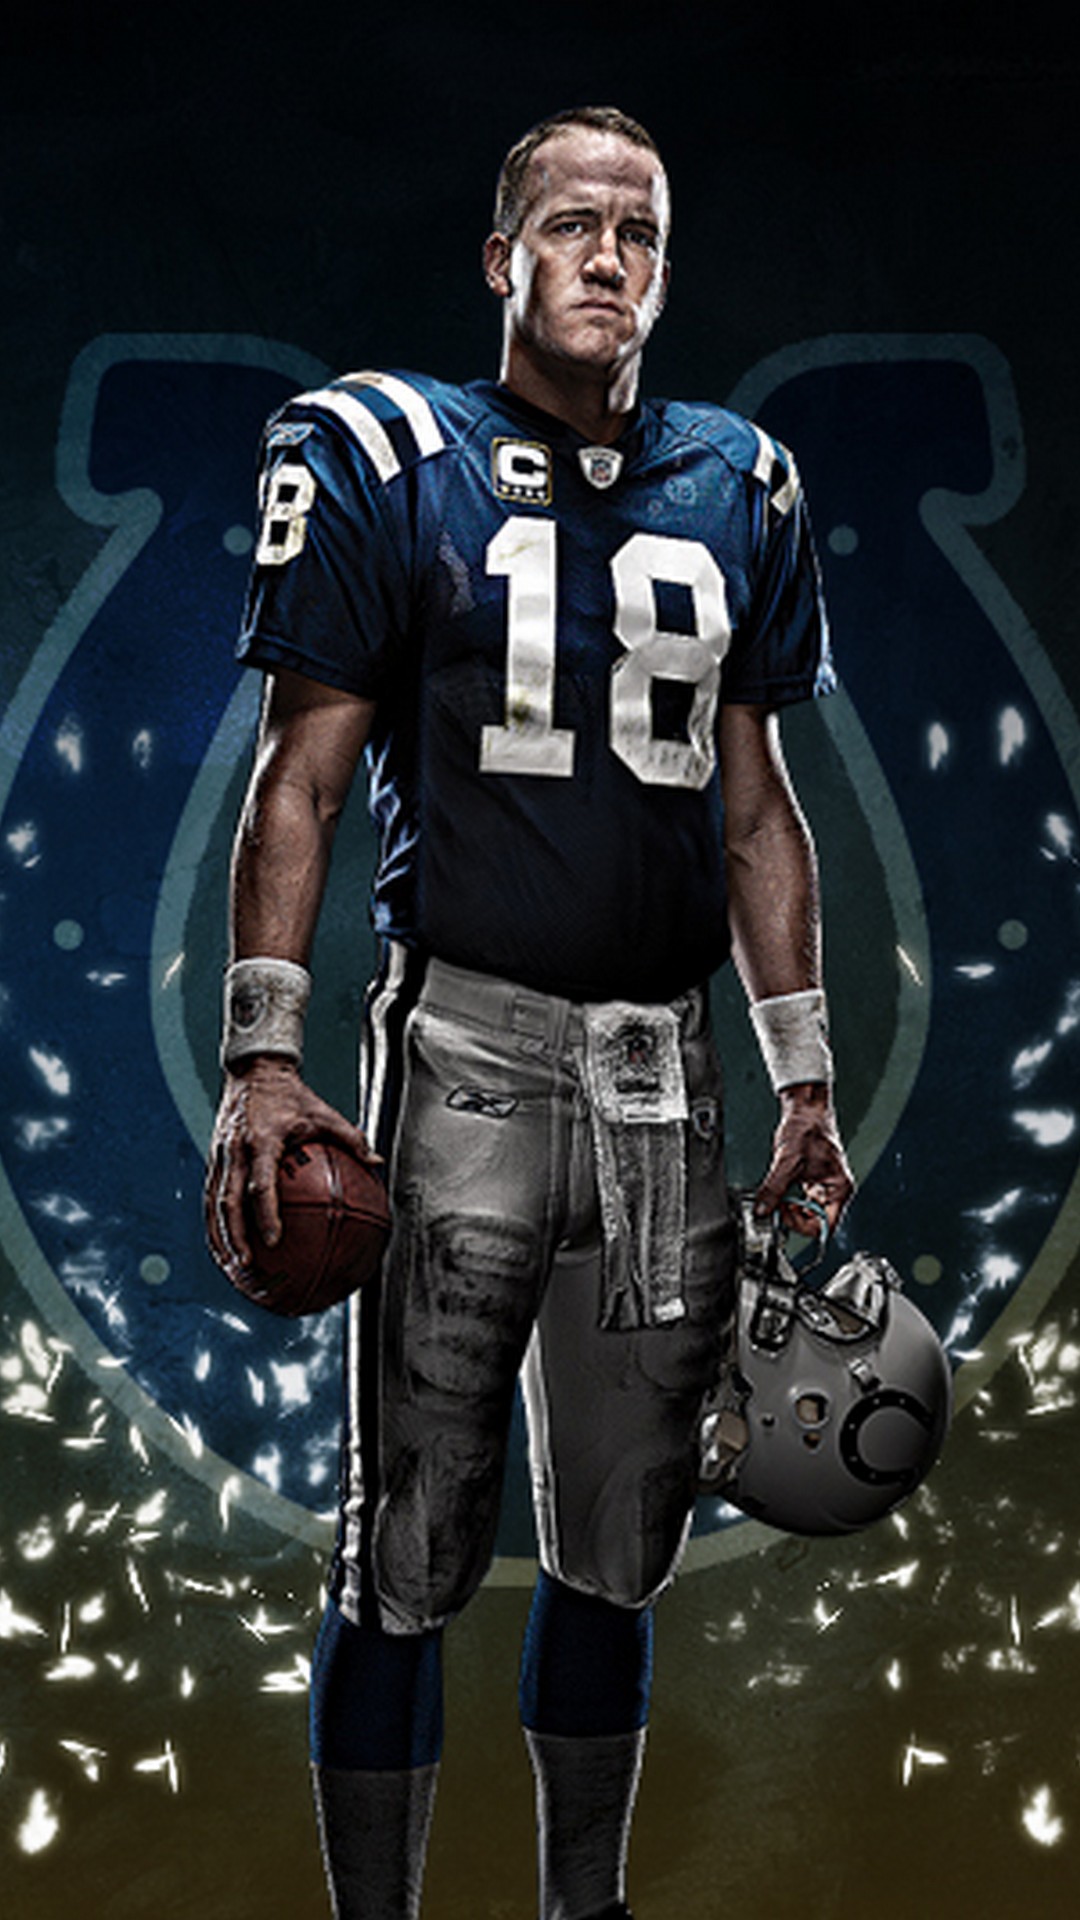 Indianapolis Colts on Twitter Wallpaper Wentzday   httpstco6xNNJ3Lh9n  Twitter